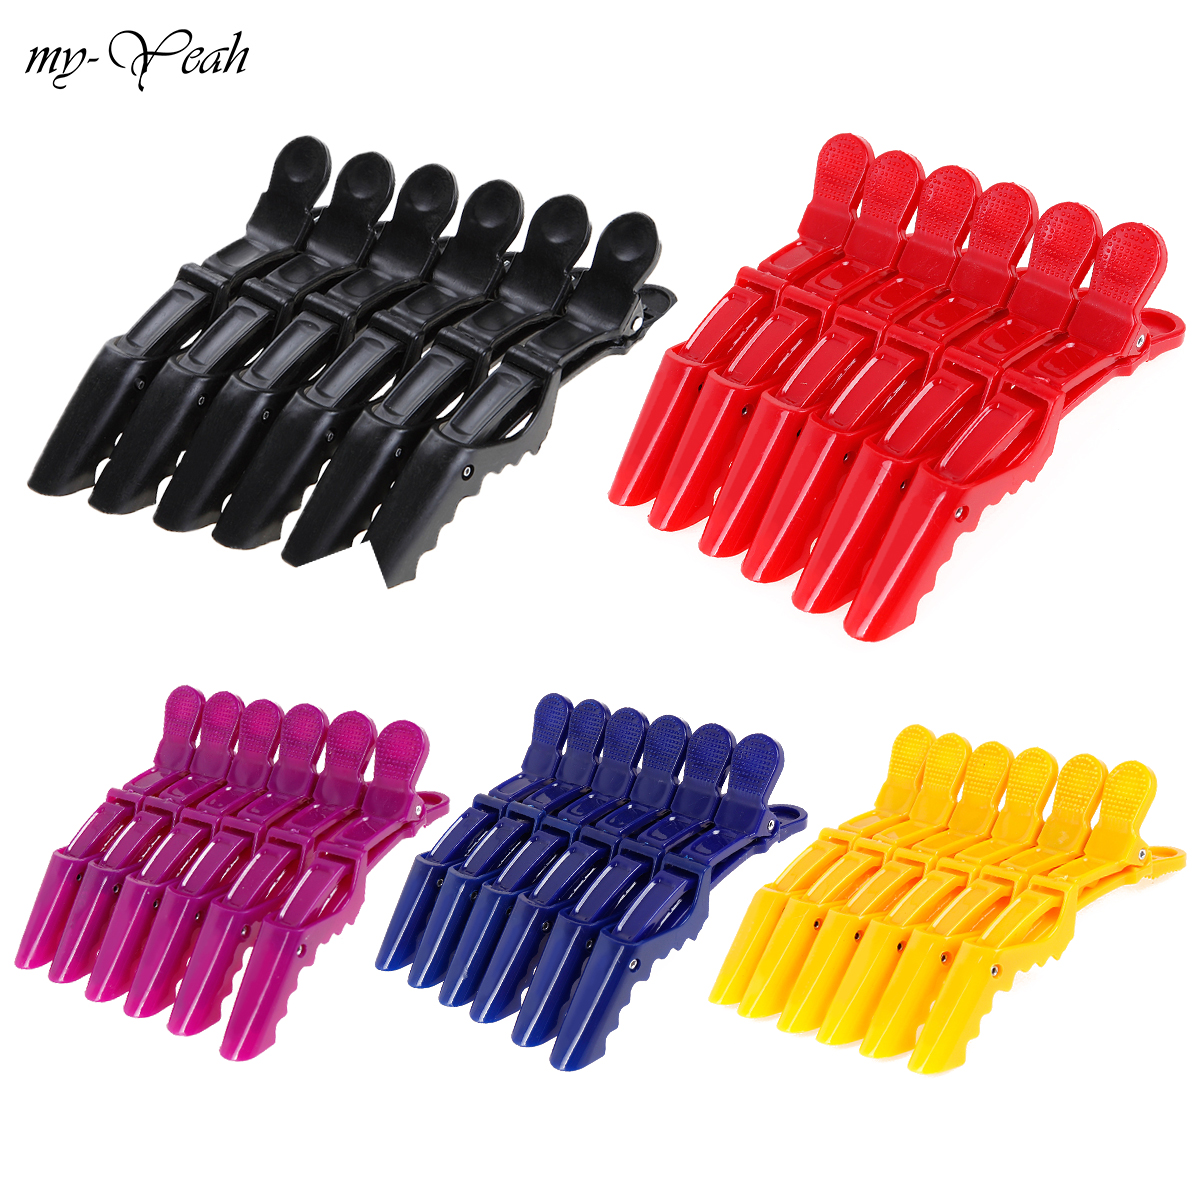 5 Color Hairdressing Clamps Claw Clip Hair Salon Plastic Crocodile Barrette Holding Hair Section Clips Grip Tool Accessories